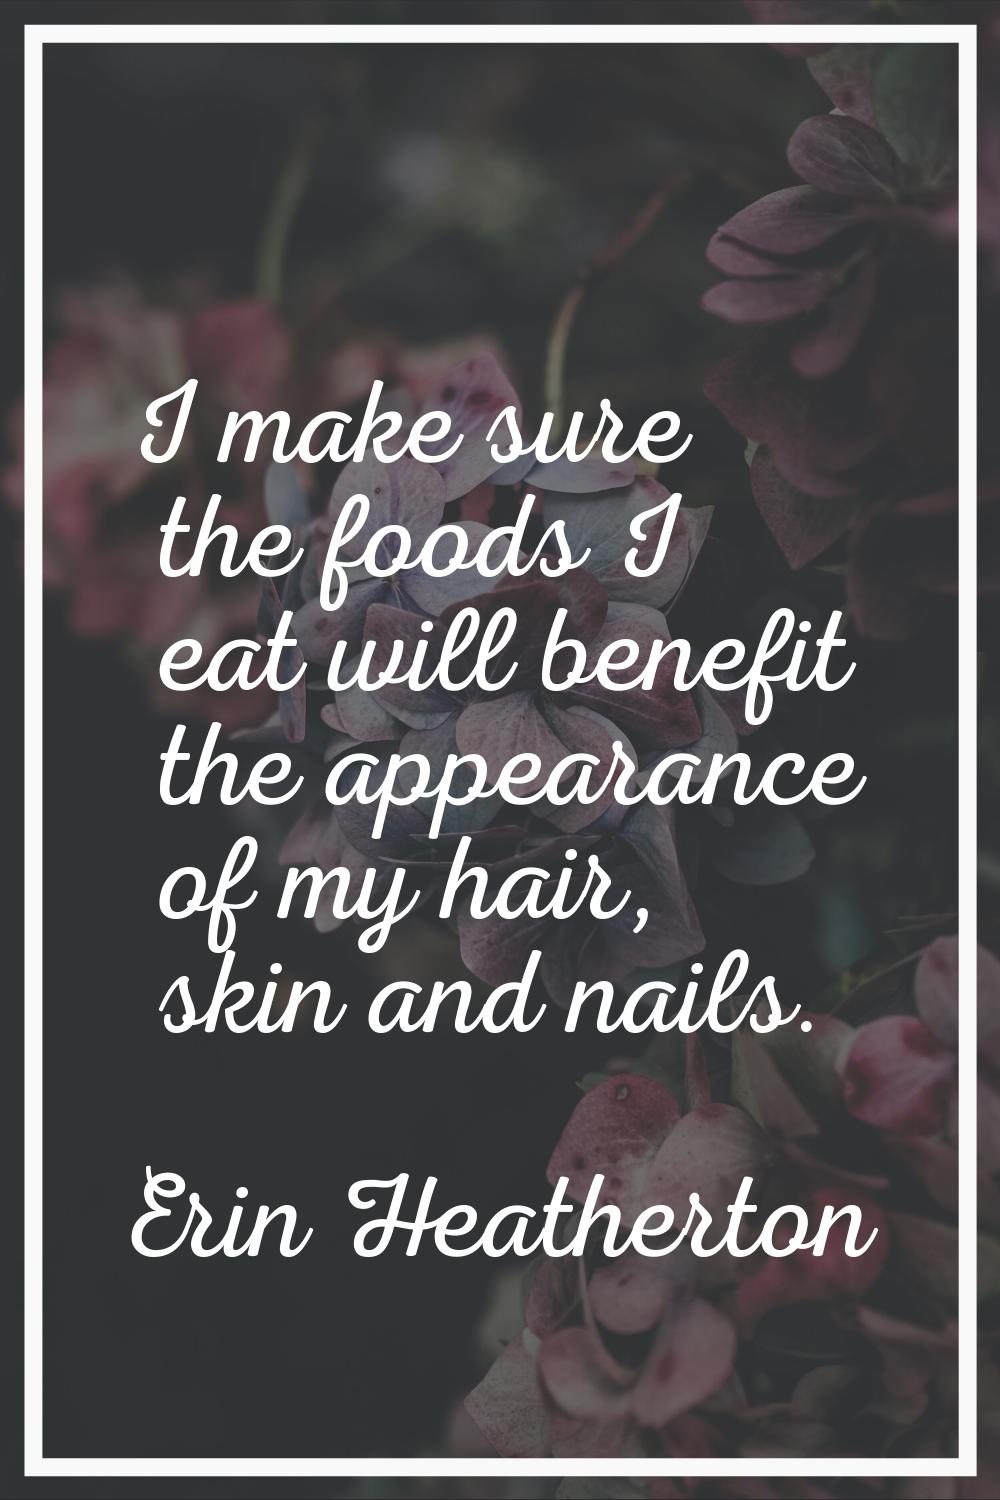 I make sure the foods I eat will benefit the appearance of my hair, skin and nails.